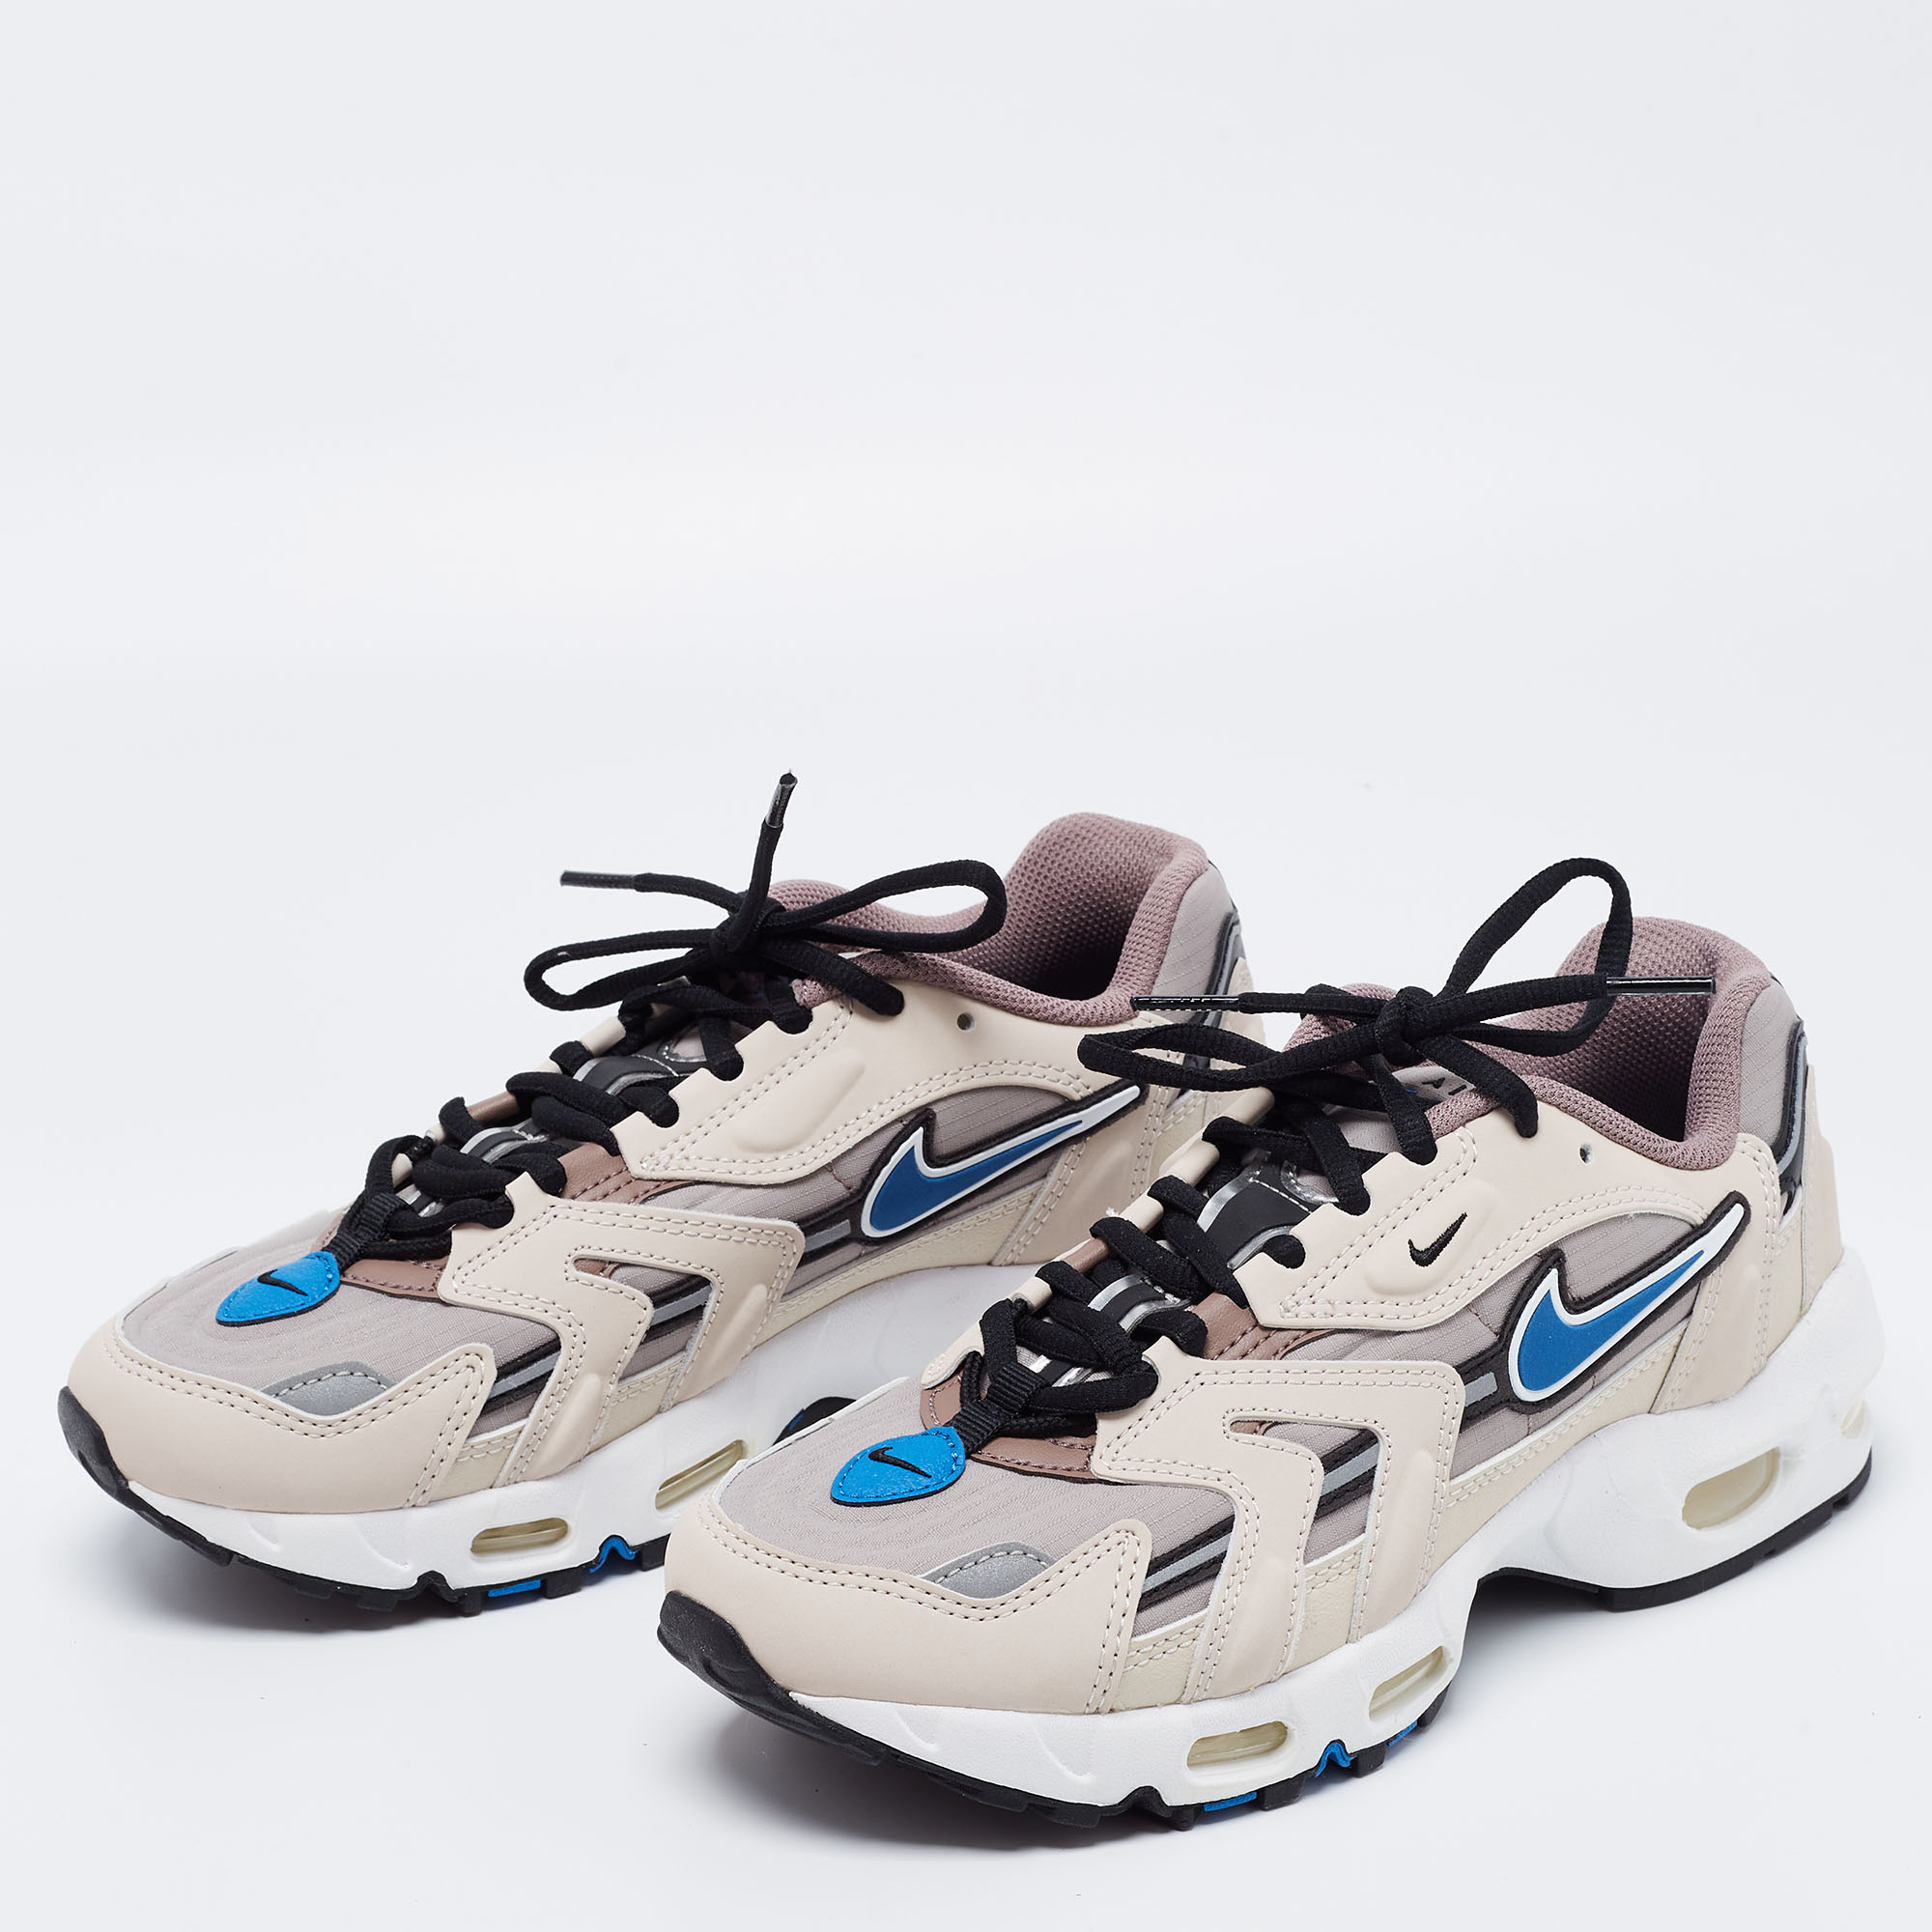 

Nike Multicolor Fabric and Leather Air Max 96 II Malt Taupe Haze Low-Top Sneakers Size